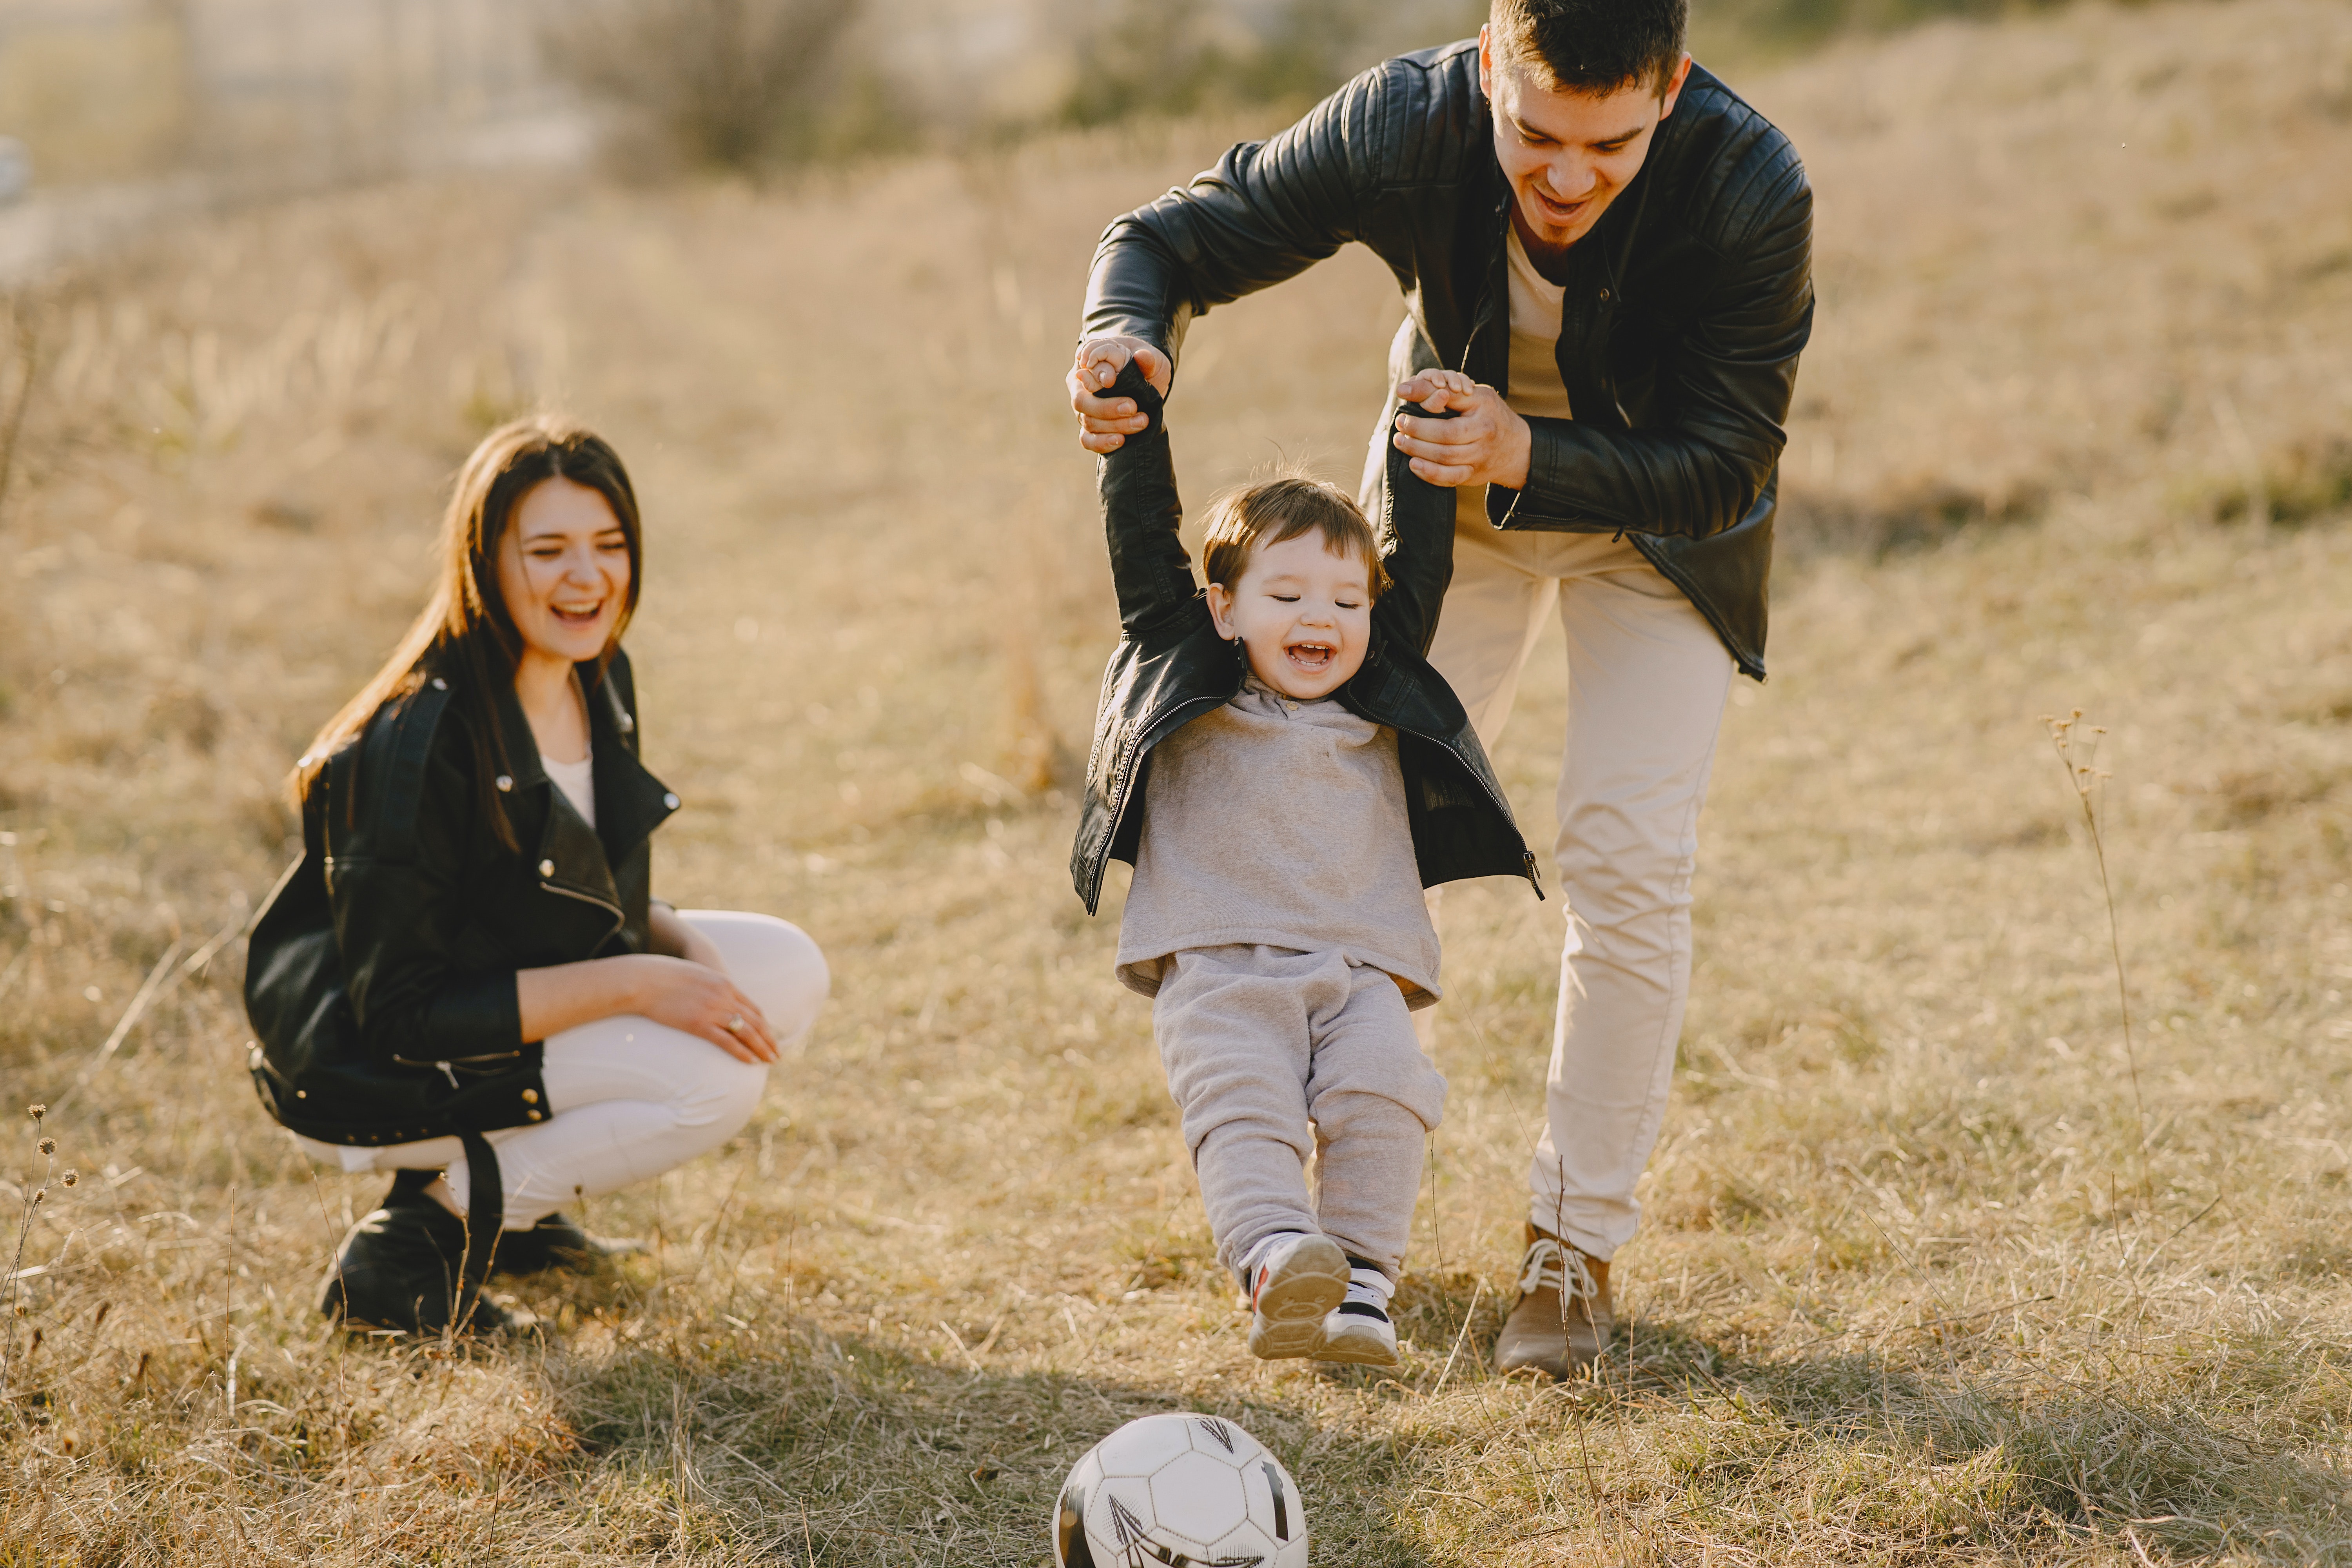 A man treated his son differently than his daughter. | Source: Pexels